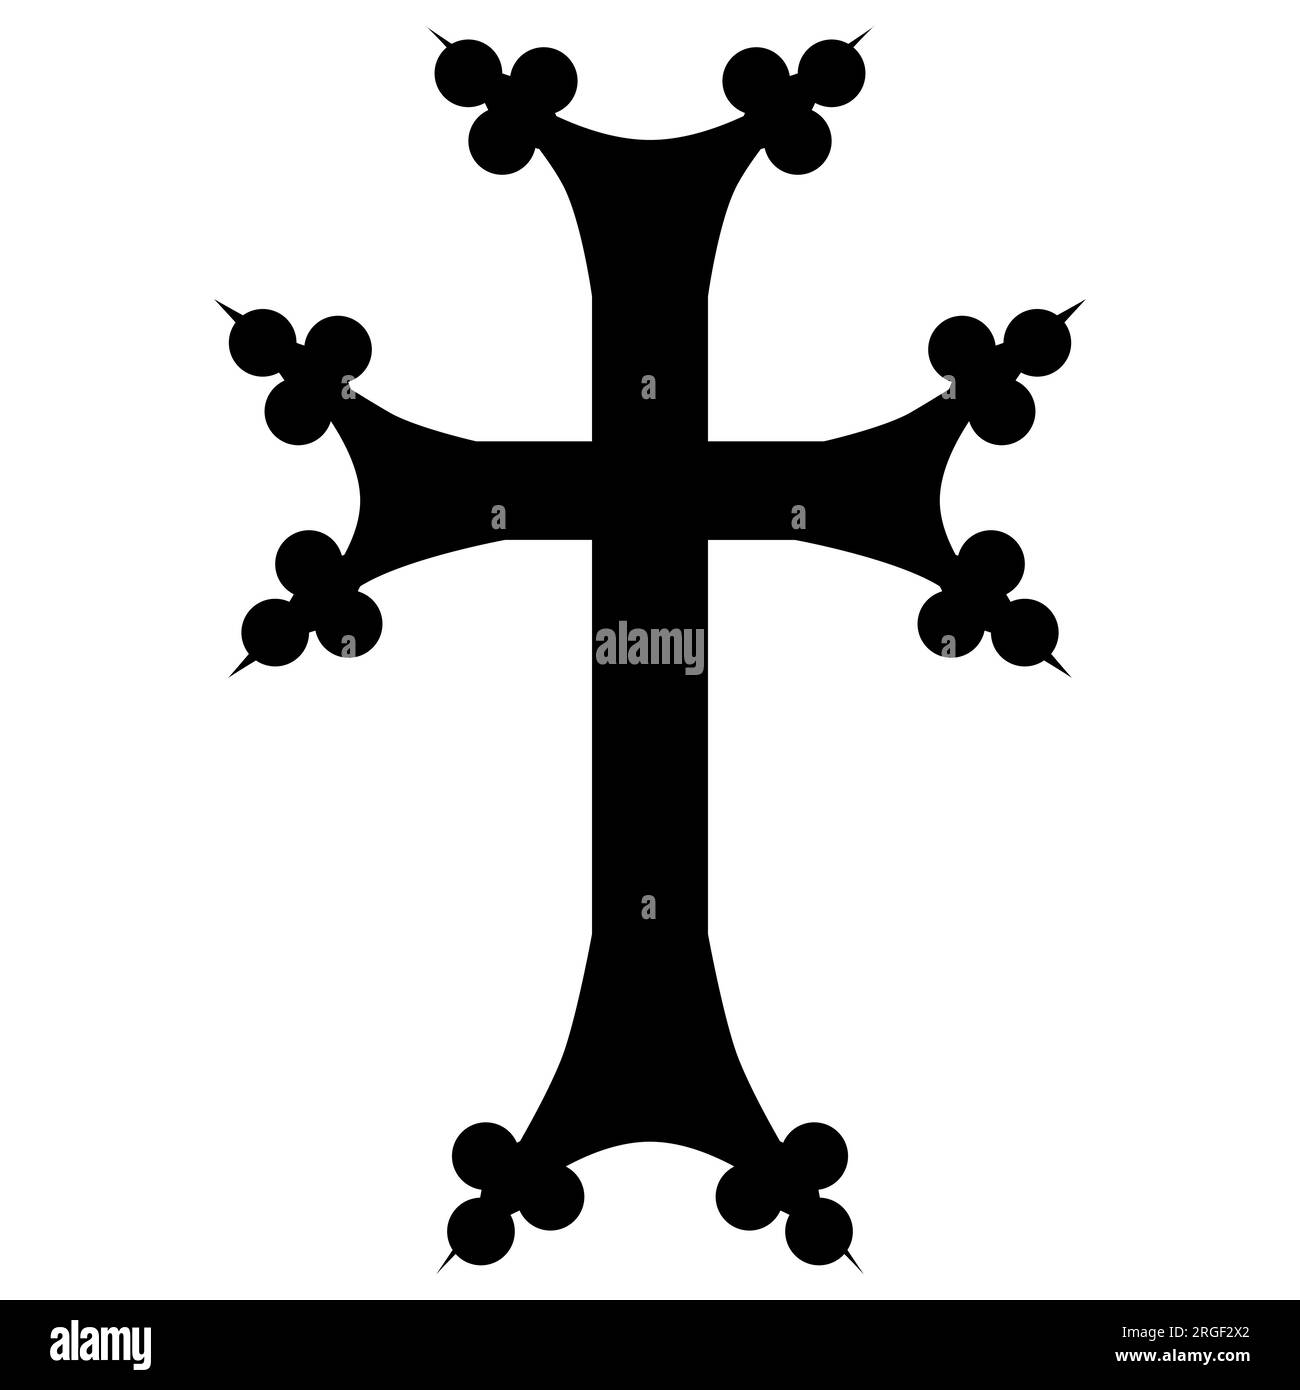 vector image of christian cross simply black flat icon Stock Vector